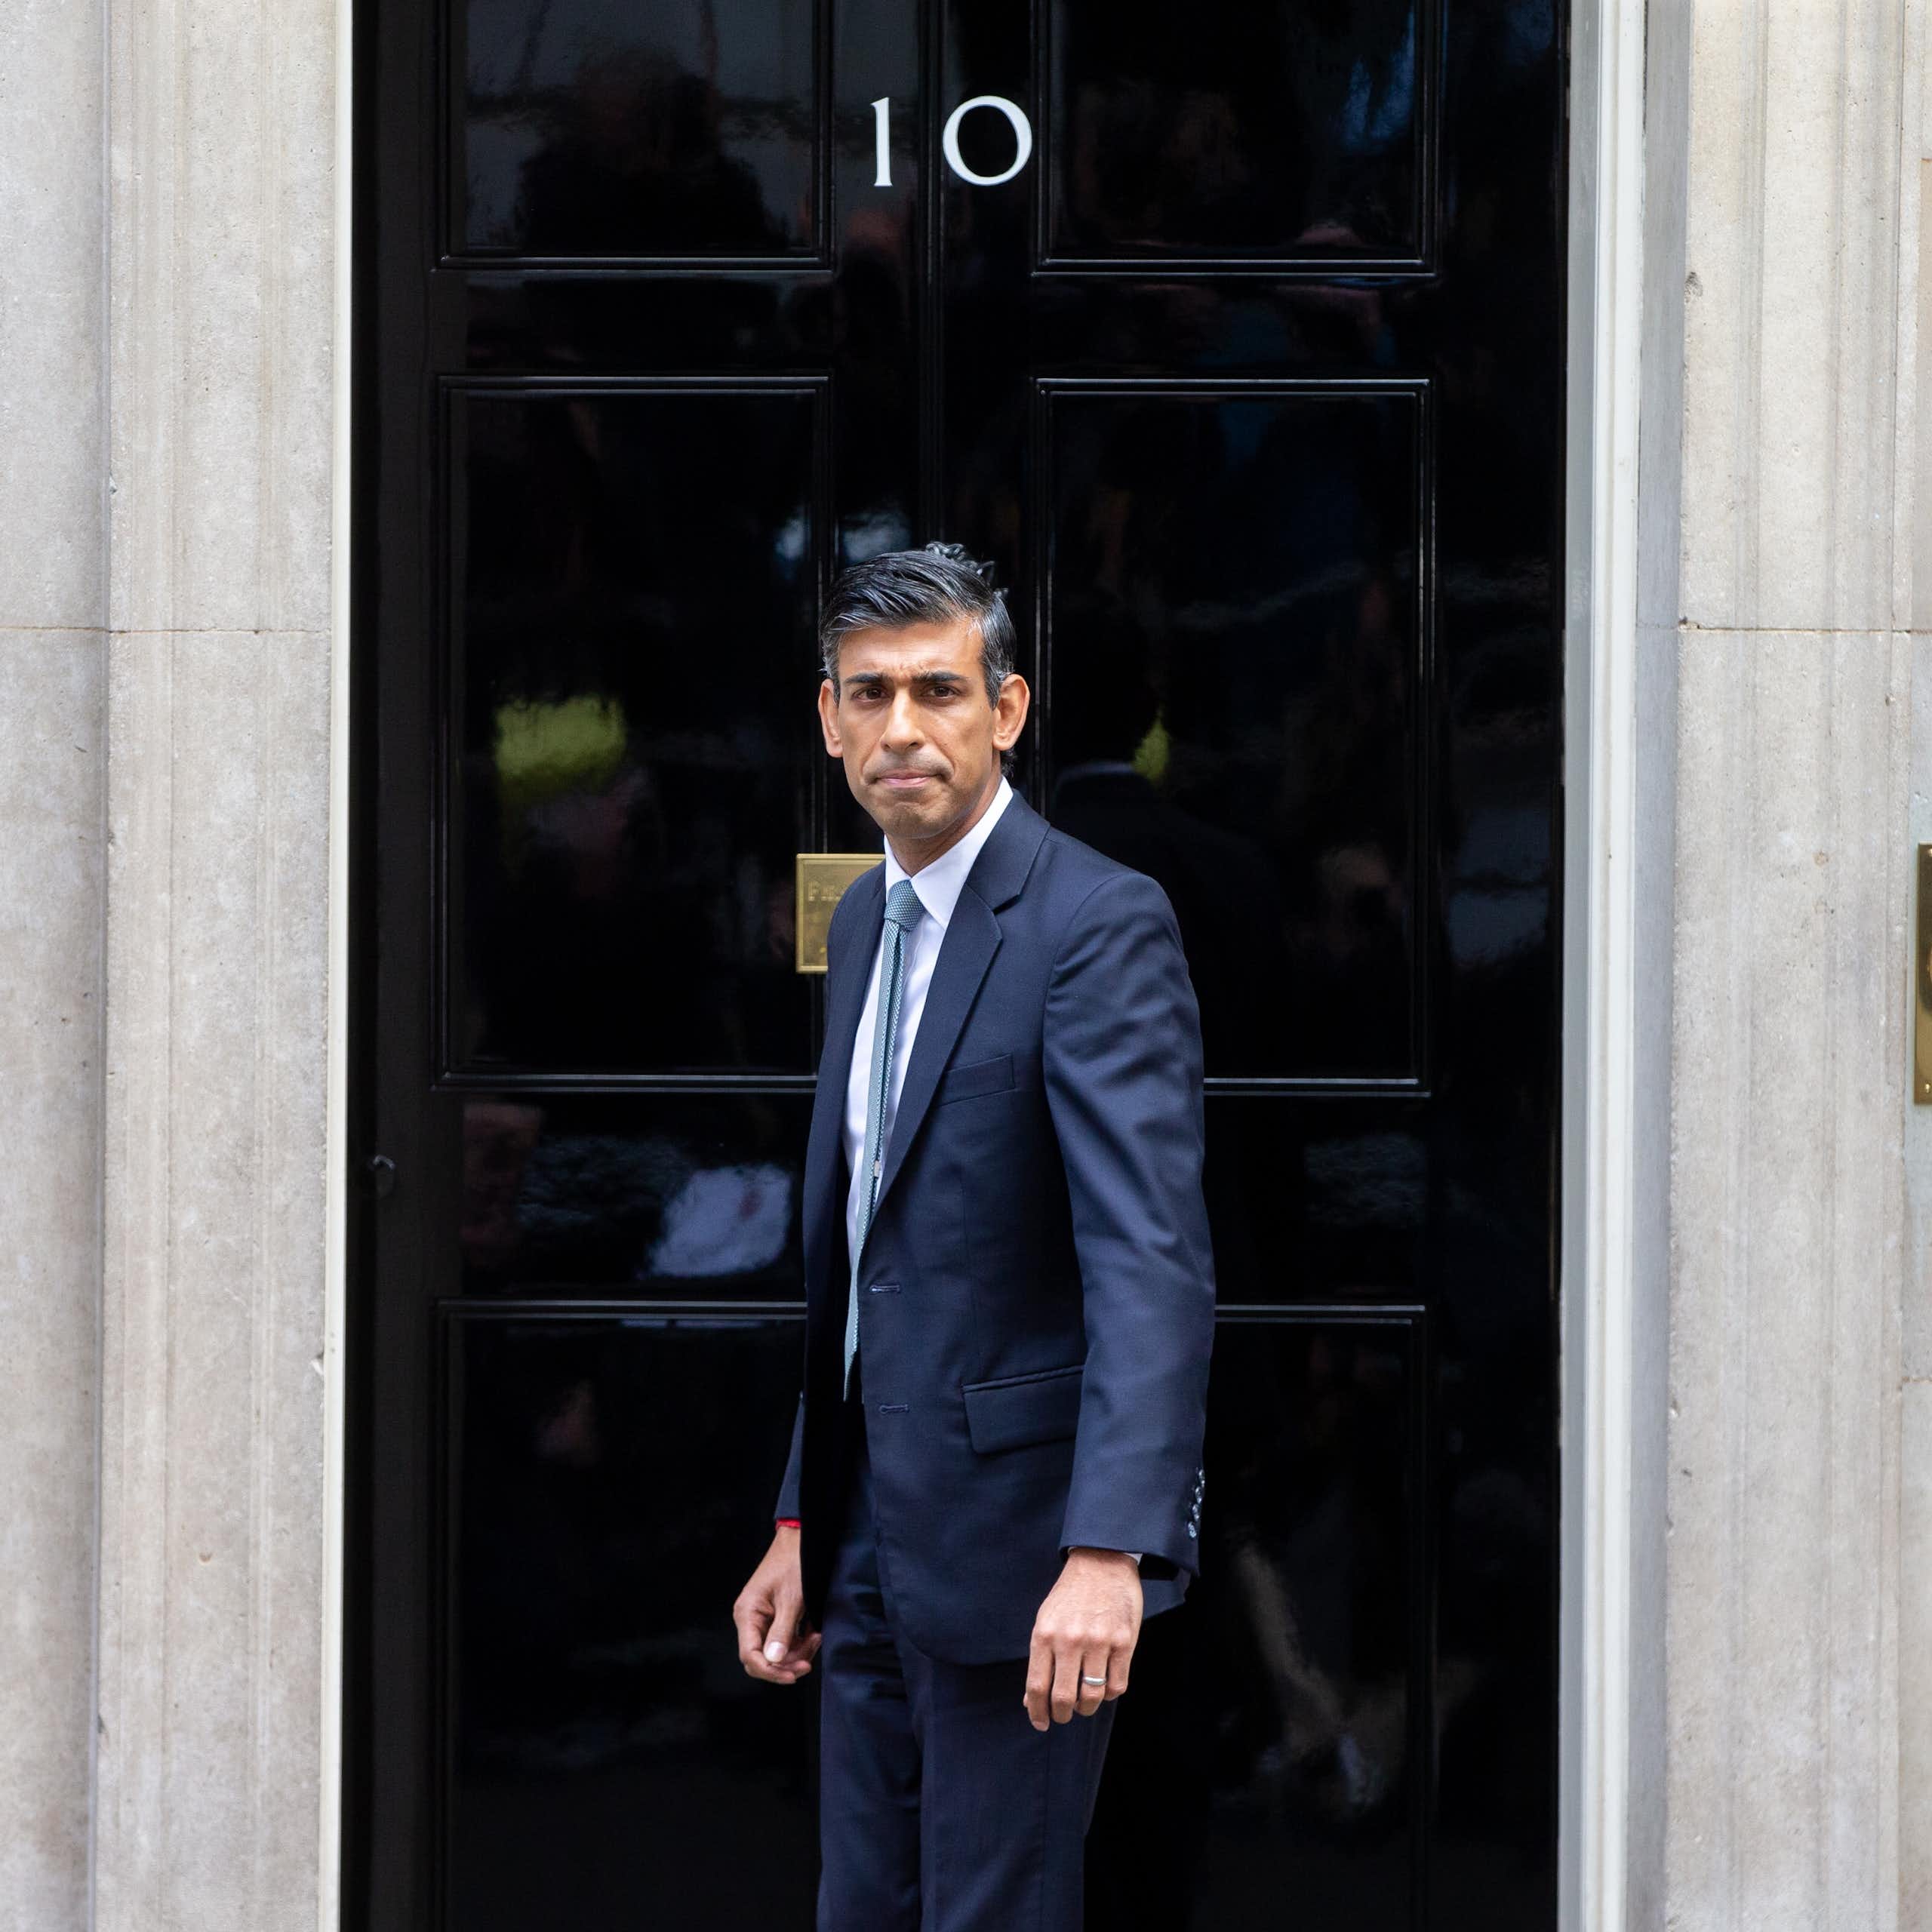 Rishi Sunak stands in front of 10 Downing Street